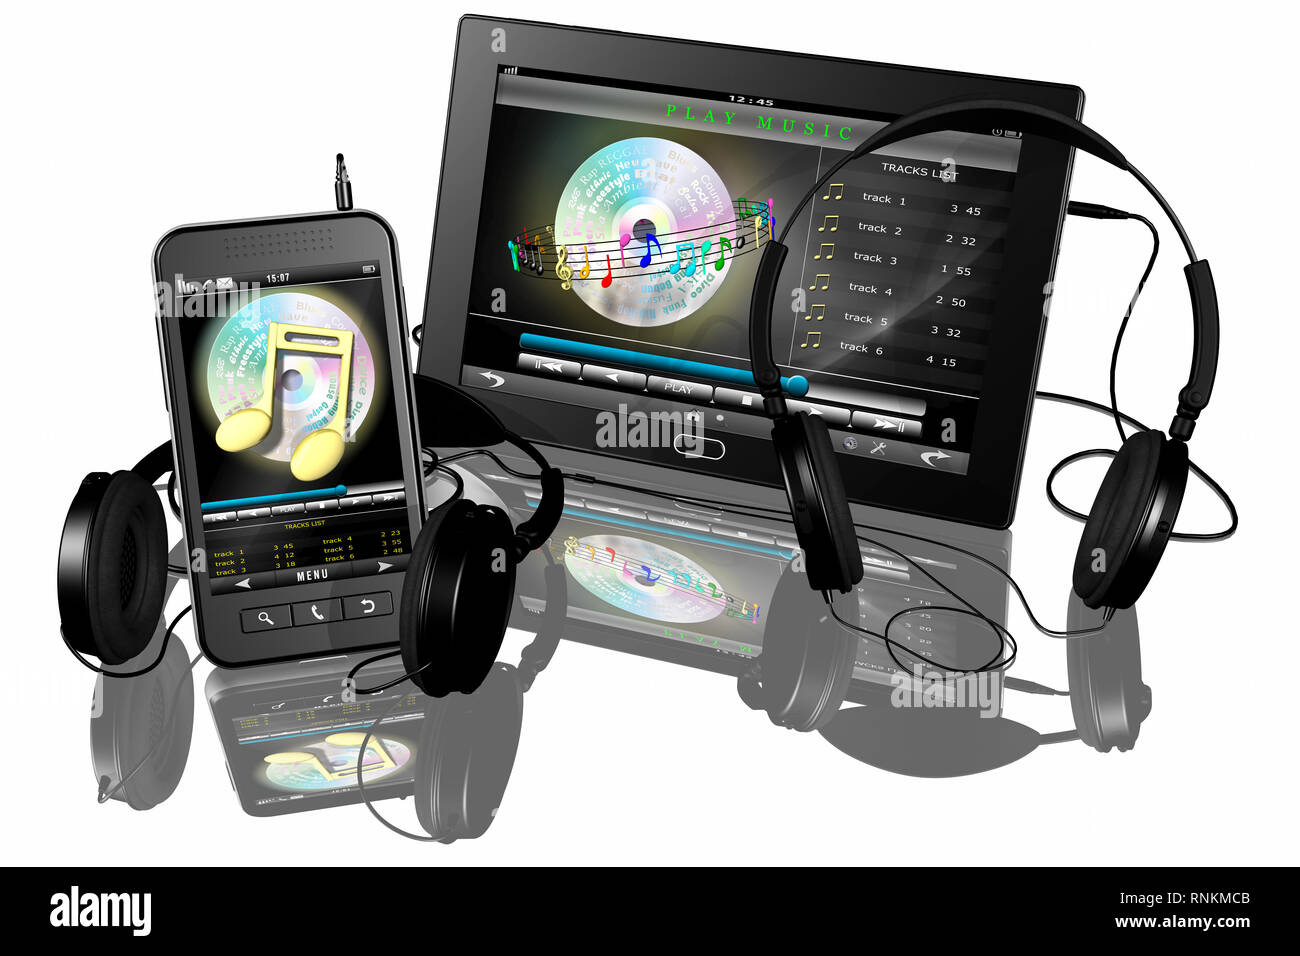 3D illustration. Tablet, Smart phone and stereo headphones for music playback application. Stock Photo